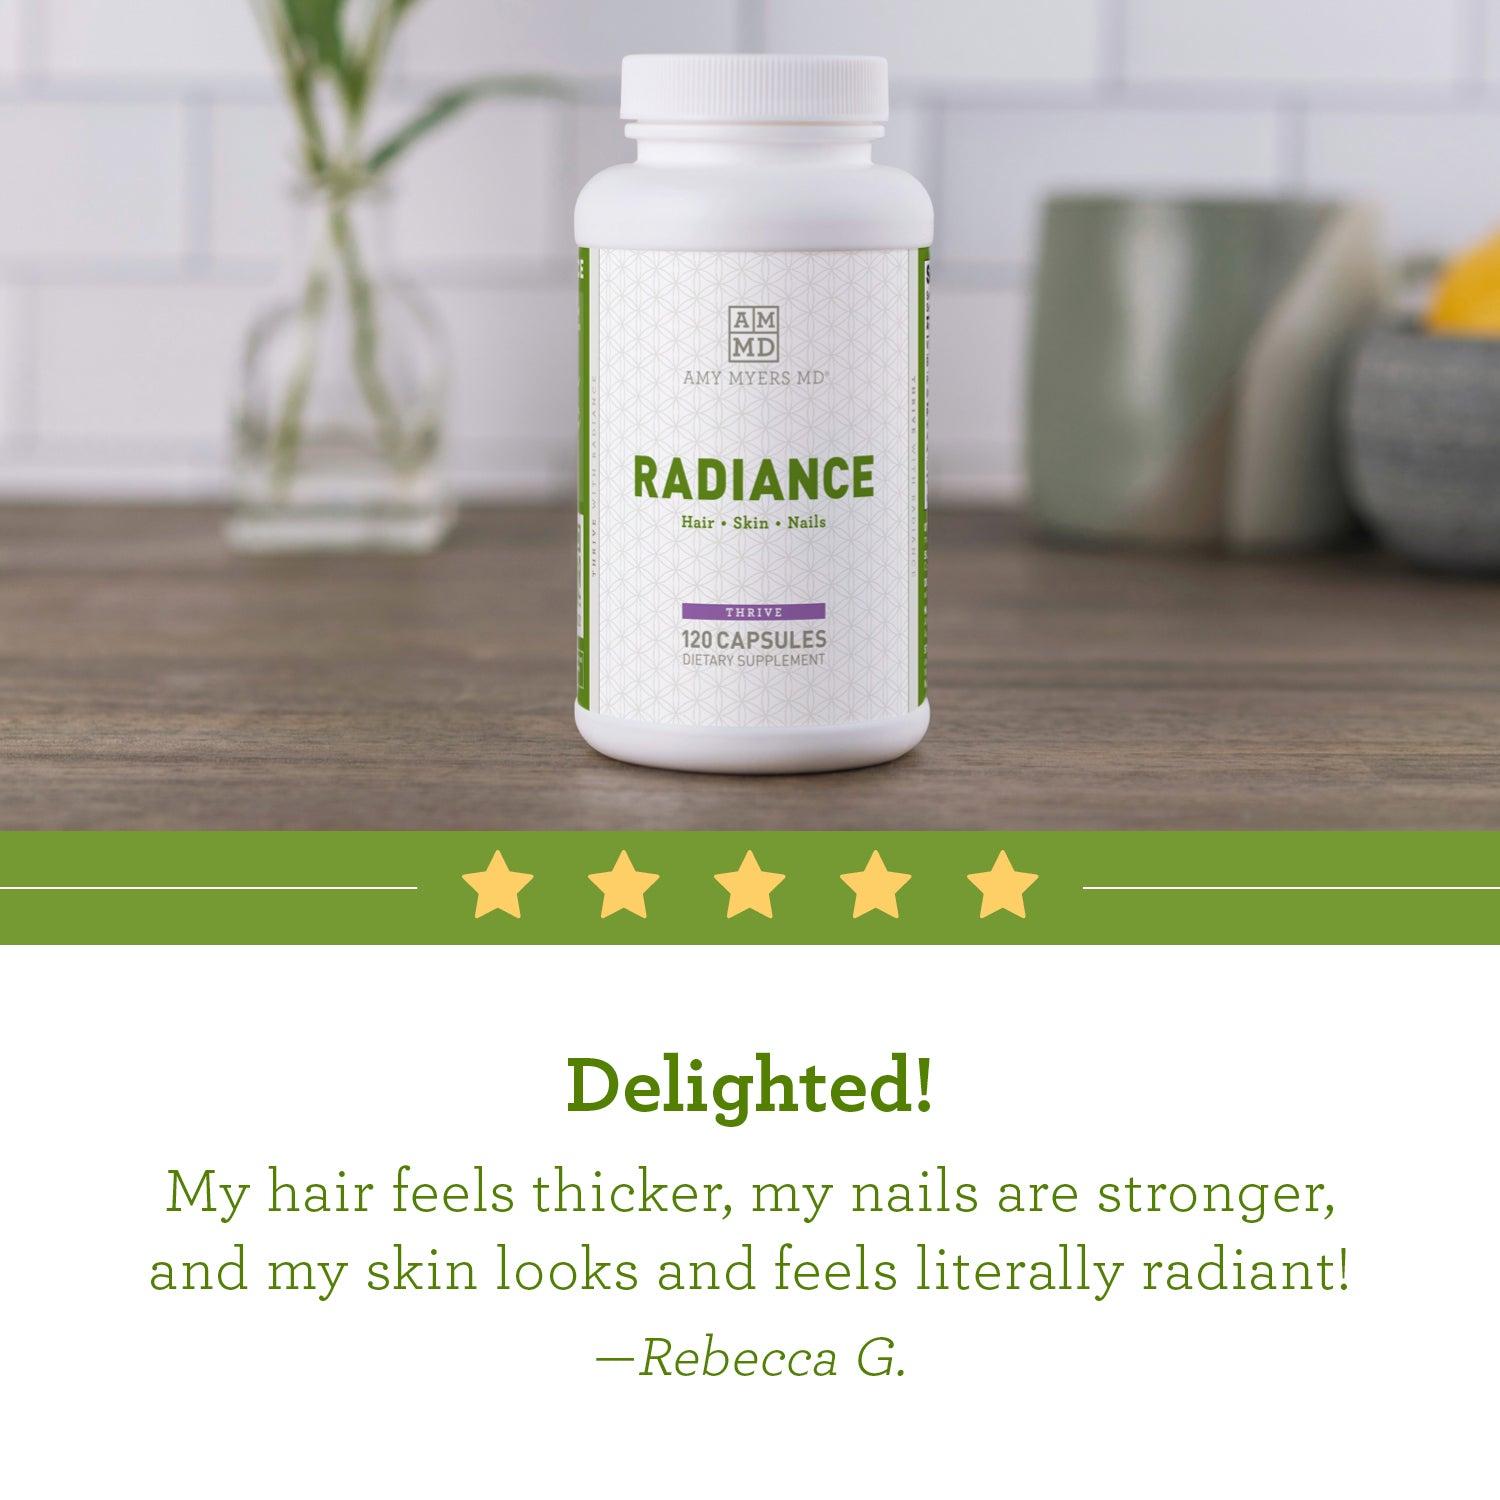 A bottle of Radiance - Hair, Skin and Nails Supplement on a tabletop with a 5 star review, "My hair feels thicker, my nails are stronger, and my skin looks and feels literally radiant!"- Rebecca G.  Amy Myers MD®